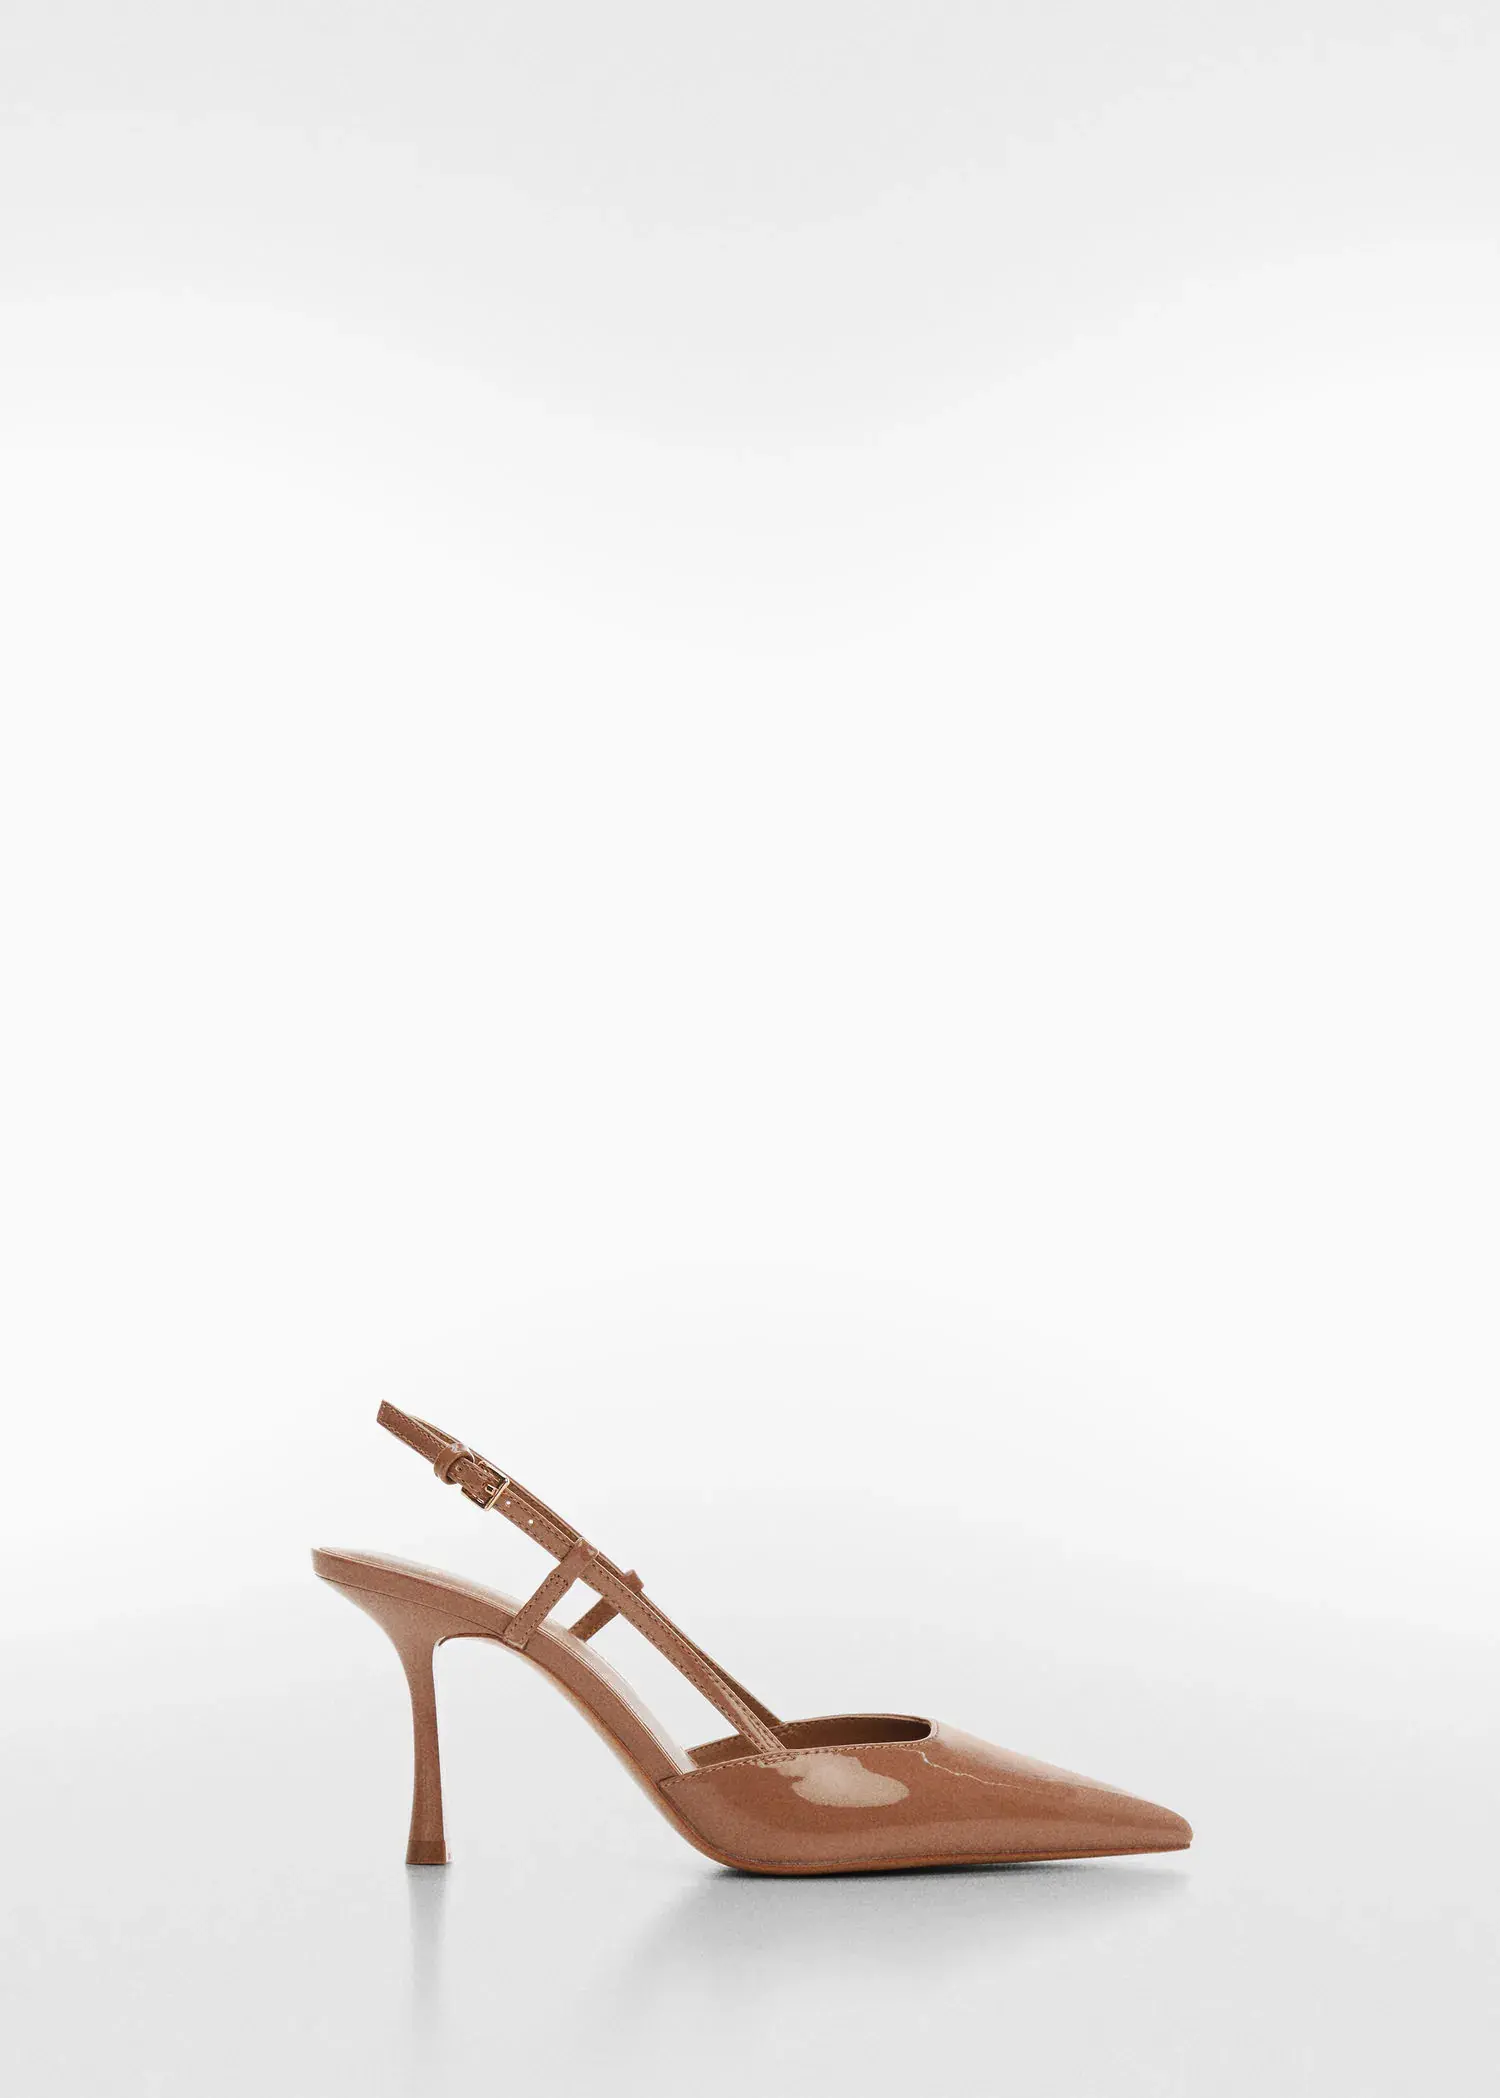 Mango Pointed toe shoe with heel. a pair of high heeled shoes on a white background. 